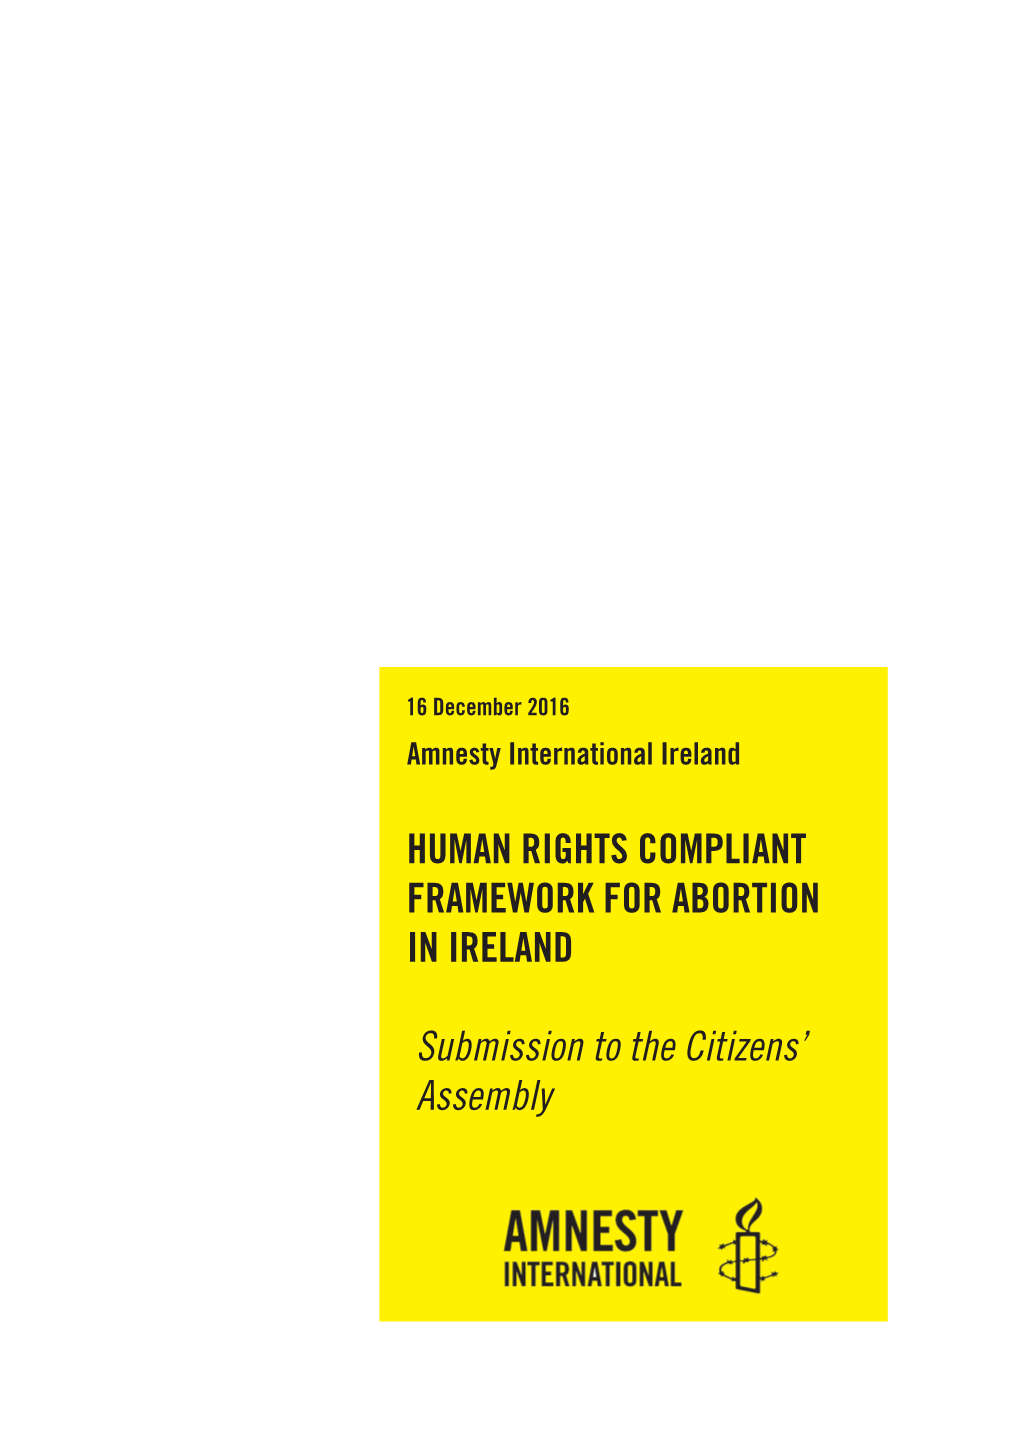 Human Rights Compliant Framework for Abortion in Ireland